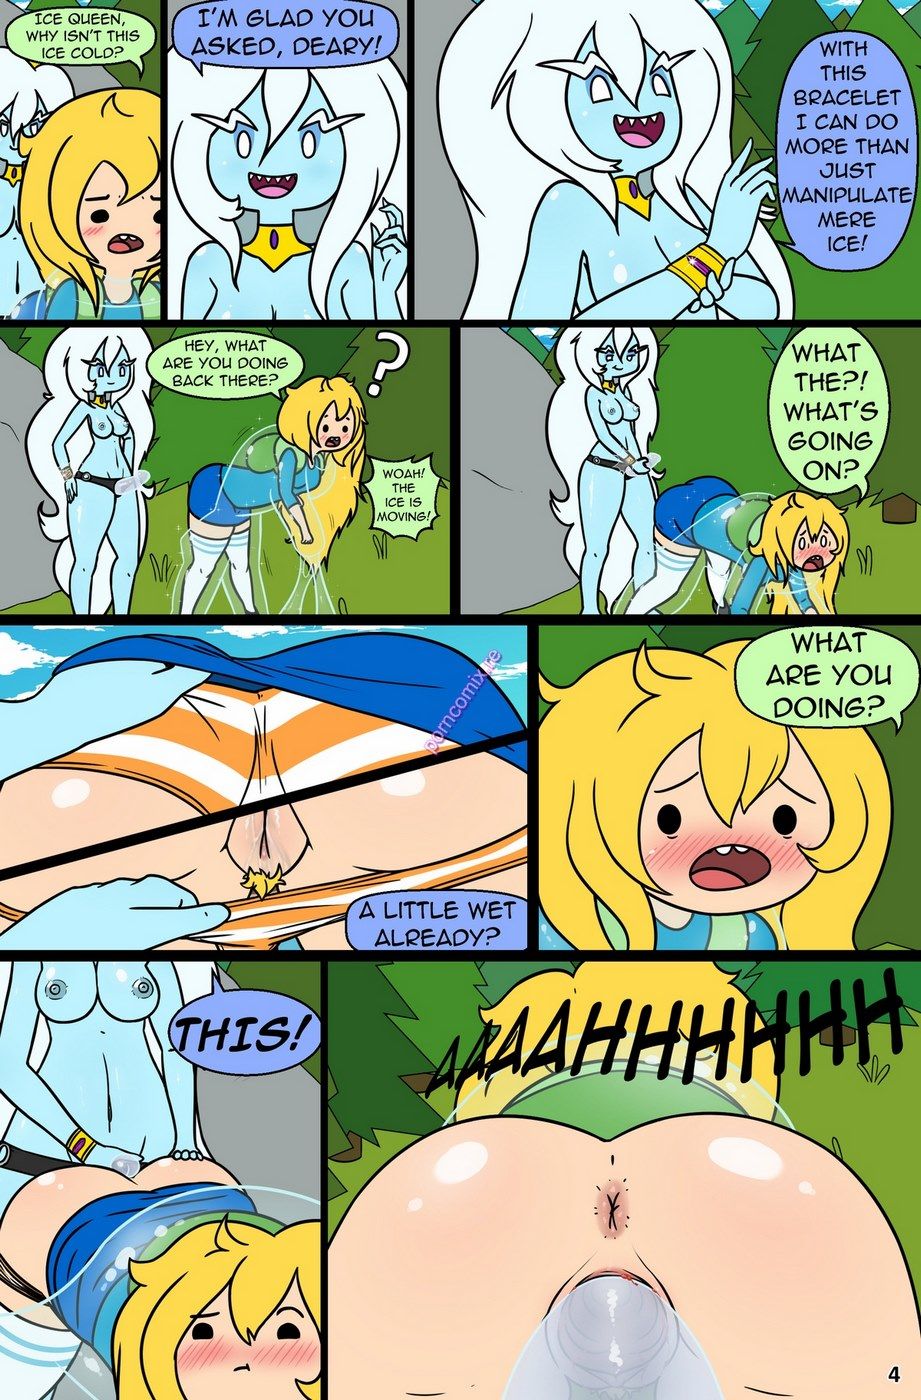 [cubbychambers]_MisAdventure_Time_Spring_Special comix_59791.jpg